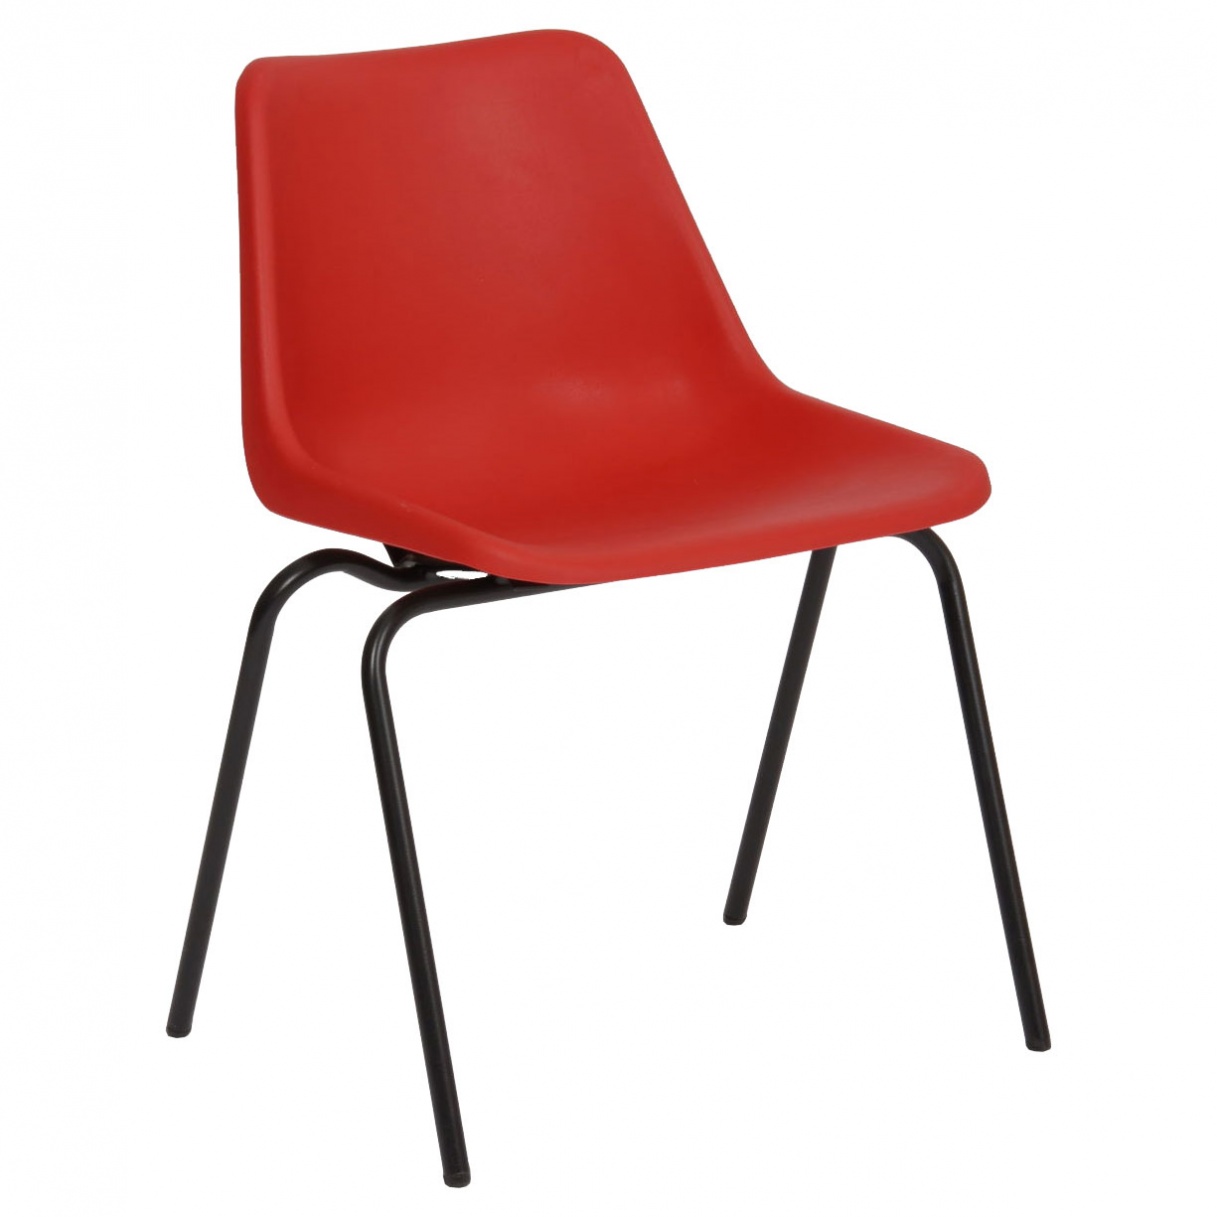 Robin Day Polyside M5 Canteen Chair